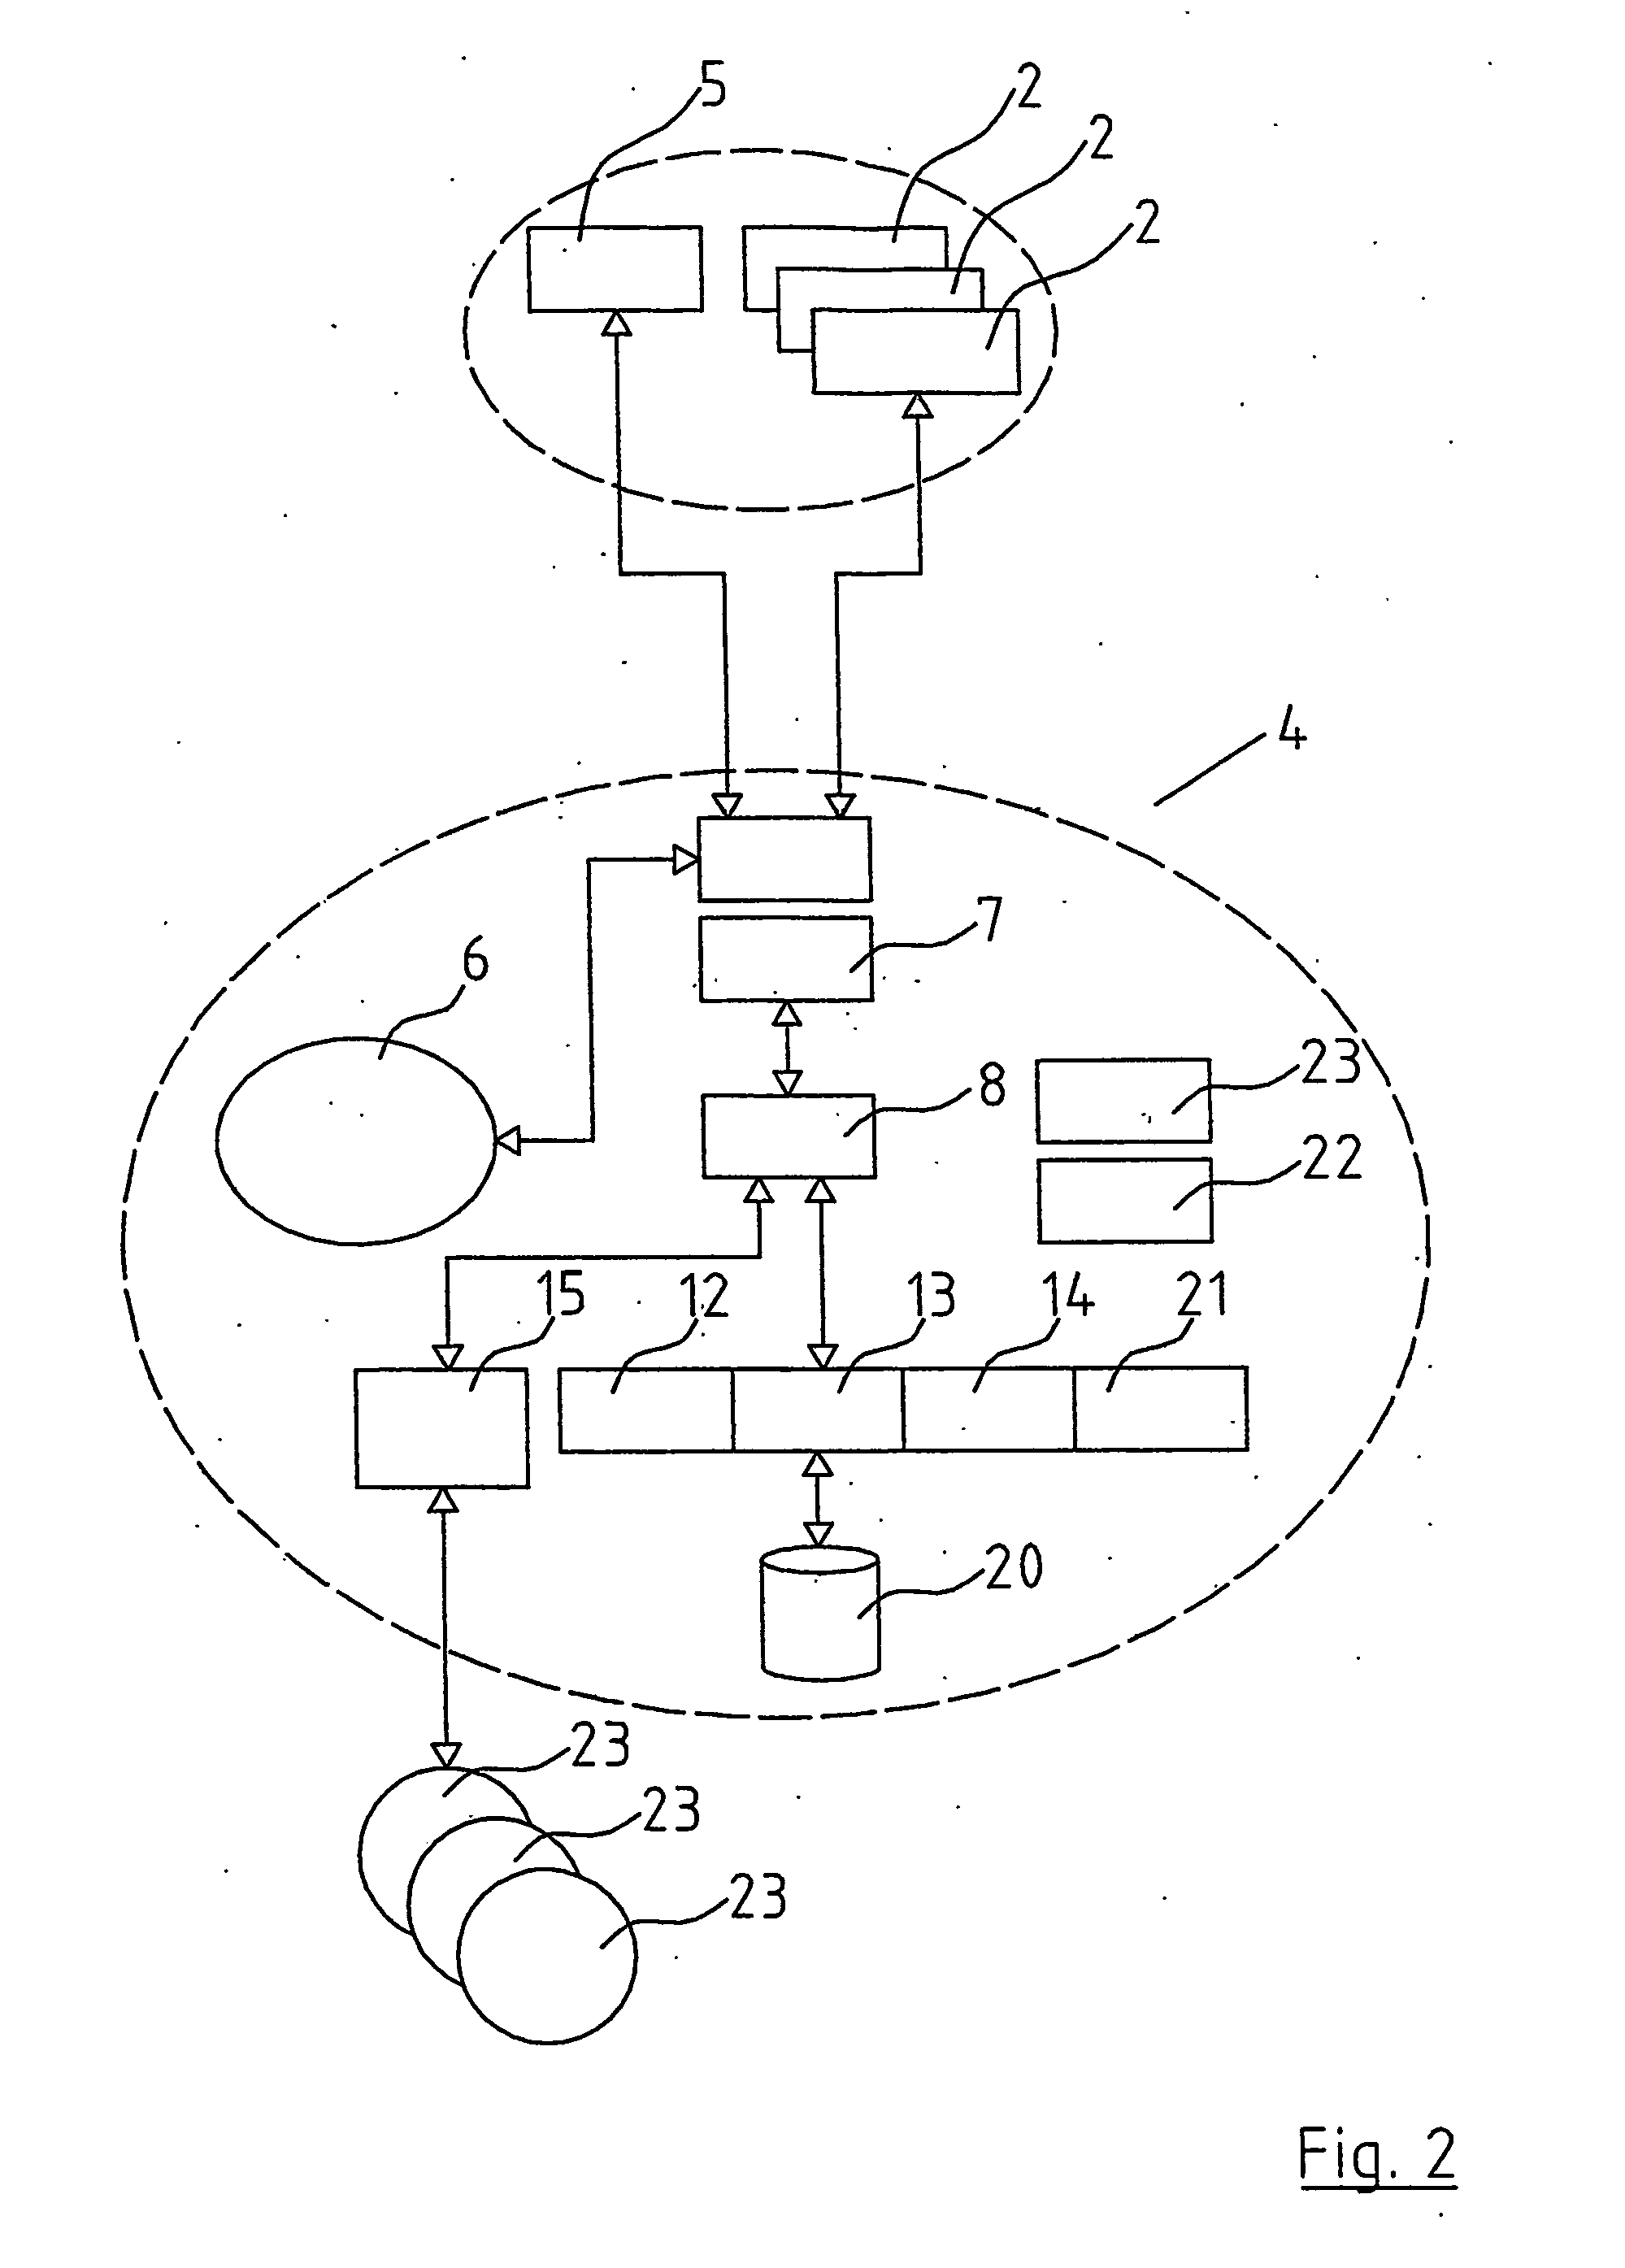 Method of scheduling delivery of goods